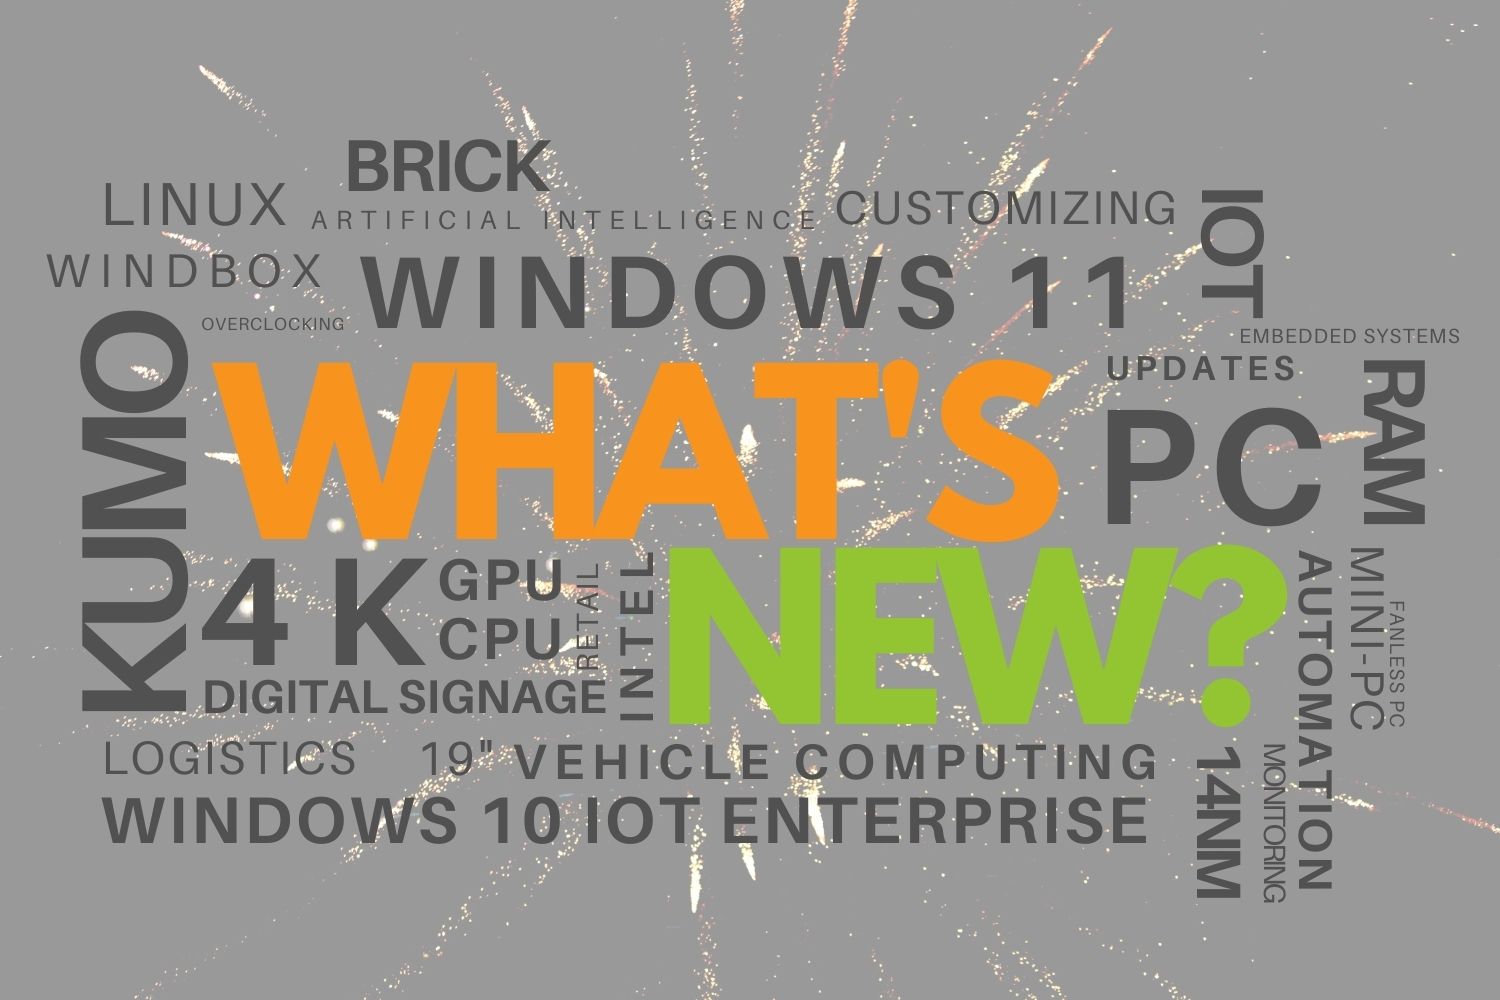 What’s New? First look at 2022 and Windows 11